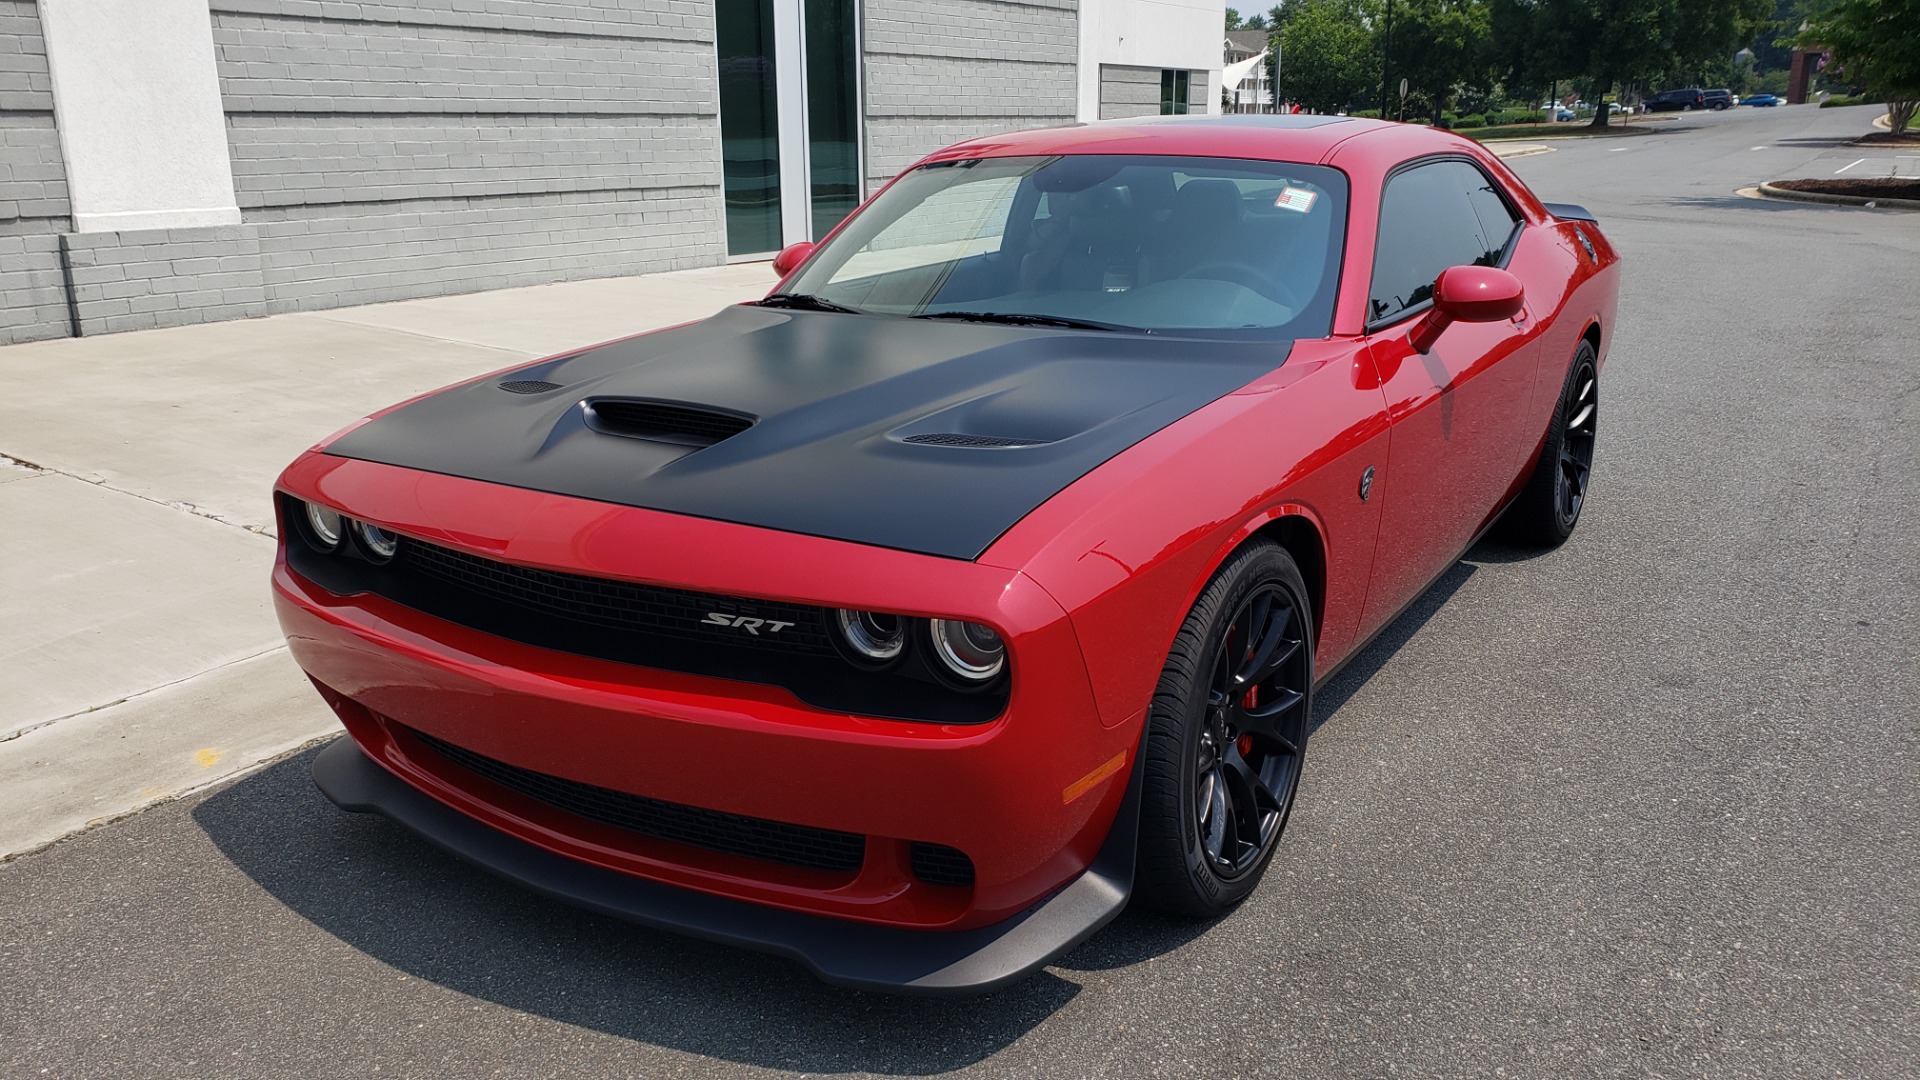 Used 2016 Dodge CHALLENGER SRT HELLCAT 707HP COUPE / AUTO / NAV / SUNROOF / H/K SND / REARVIEW for sale Sold at Formula Imports in Charlotte NC 28227 3